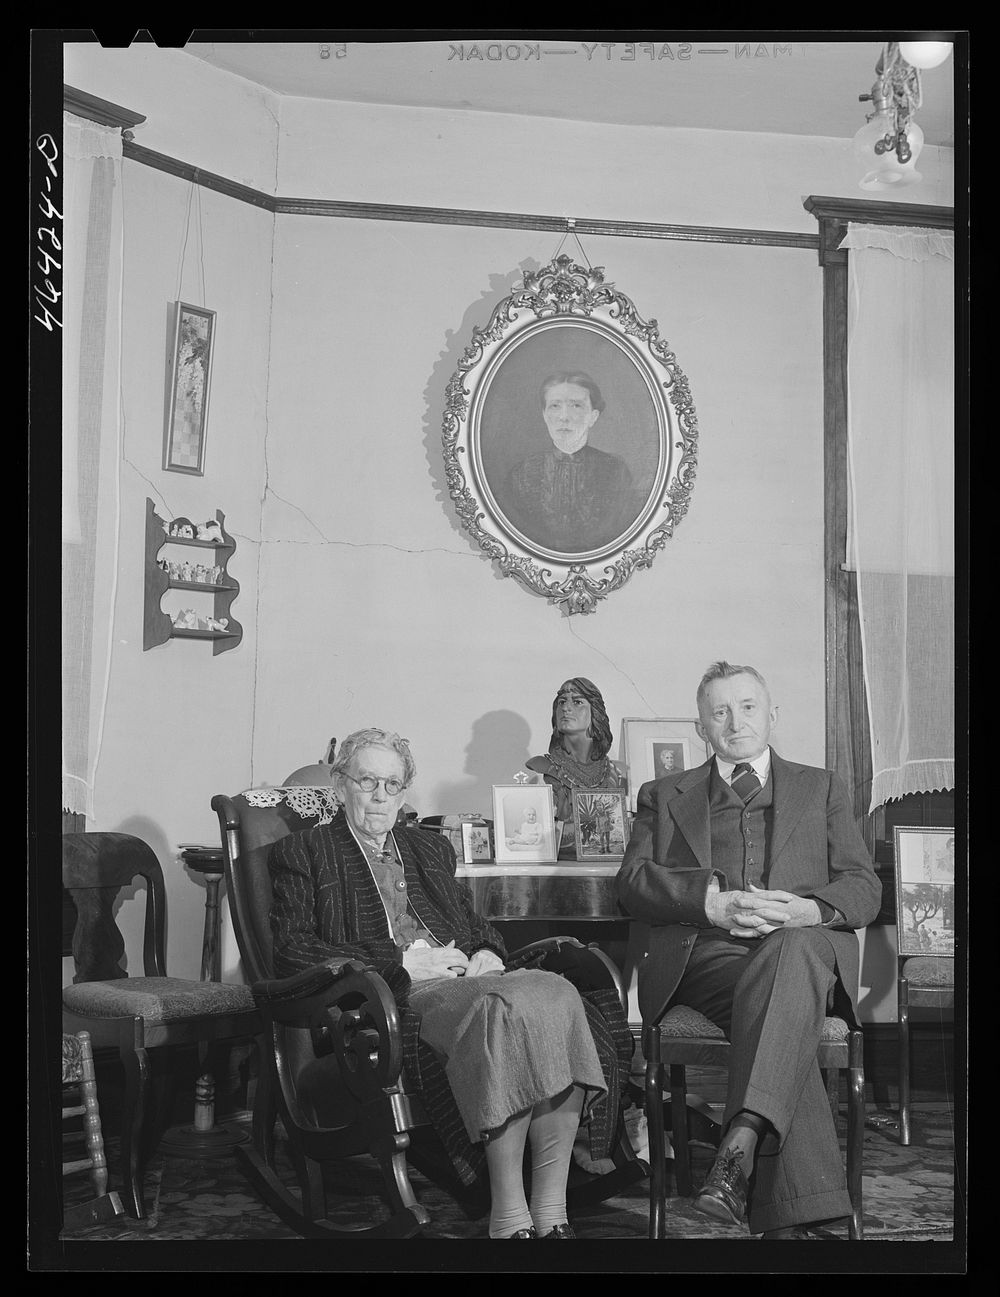 Dr. and Mrs. T. Rice, Dr. Rice is county historian. Greensboro, Greene County, Georgia. Sourced from the Library of Congress.